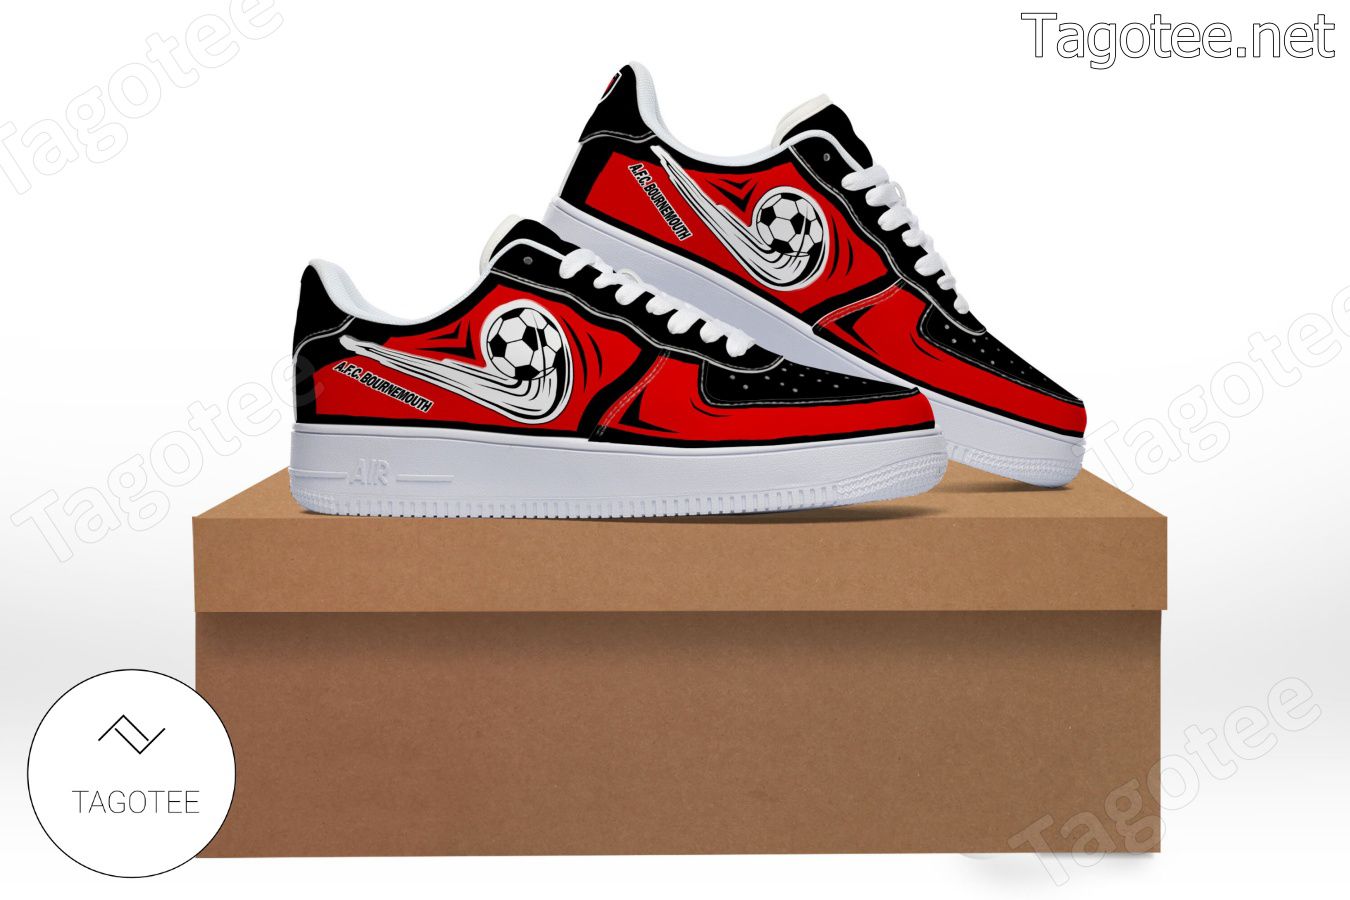 A.F.C. Bournemouth Logo Air Force 1 Shoes